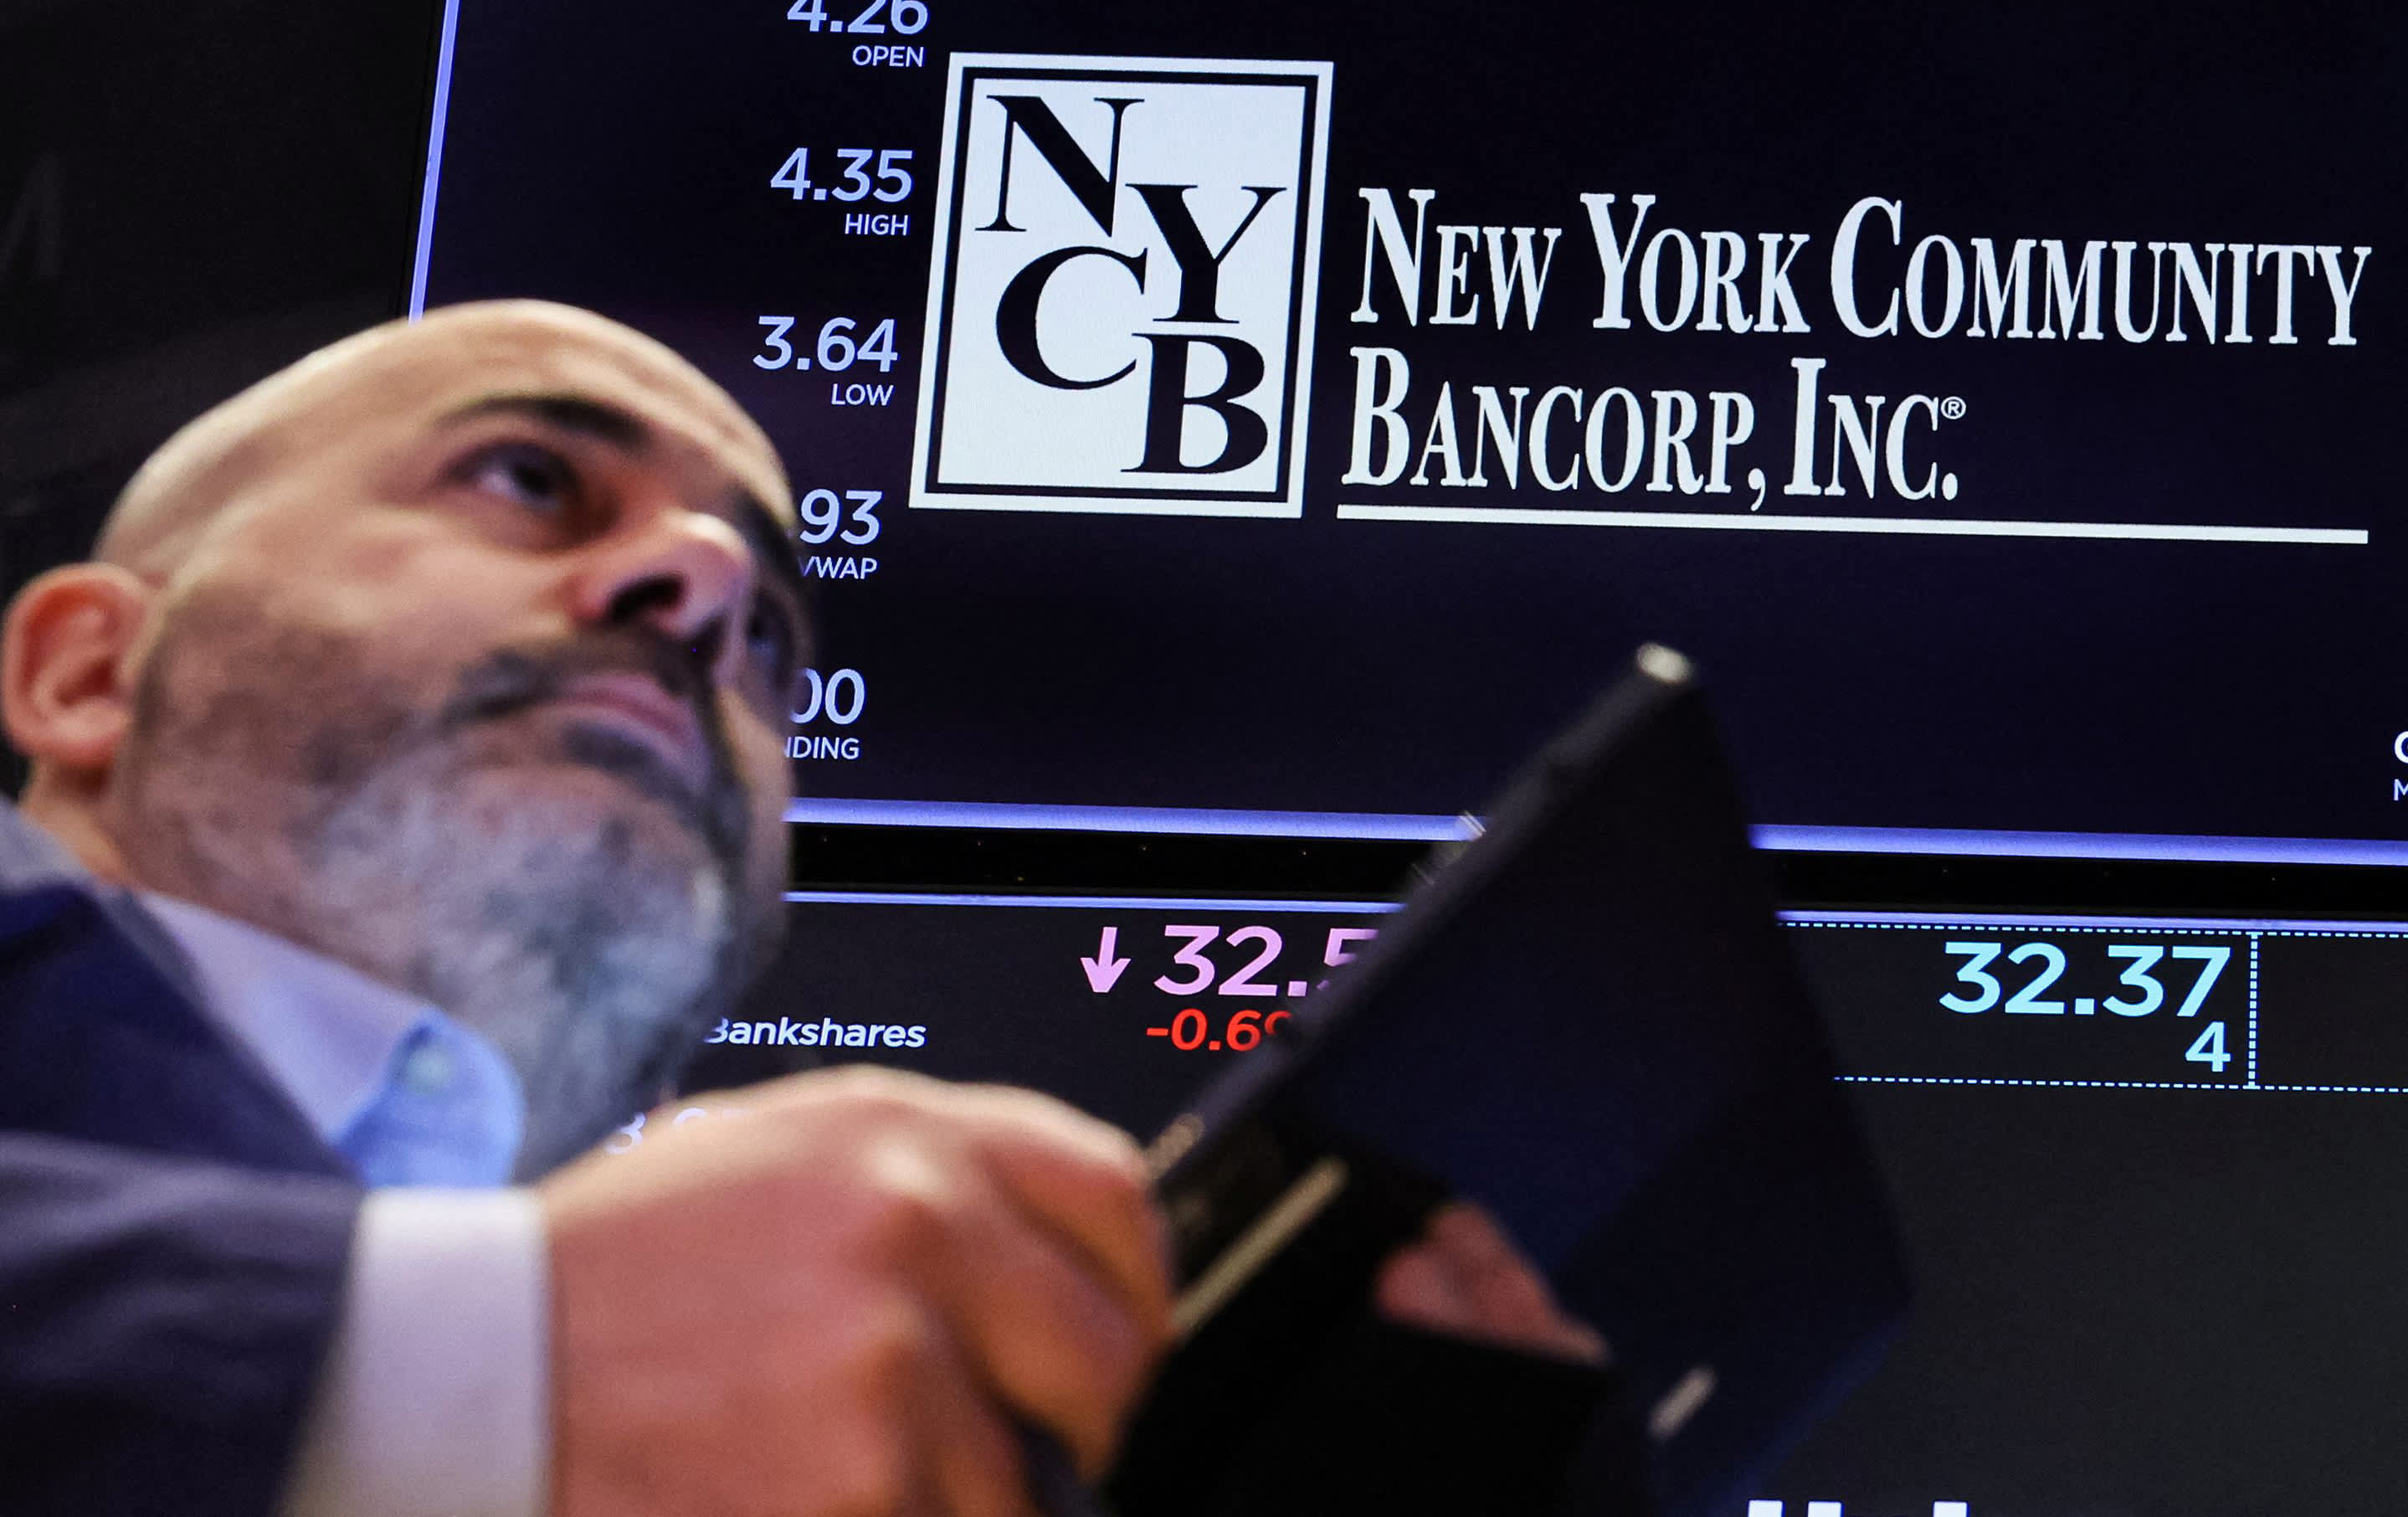 NYCB shares are rallying after the troubled regional bank announces